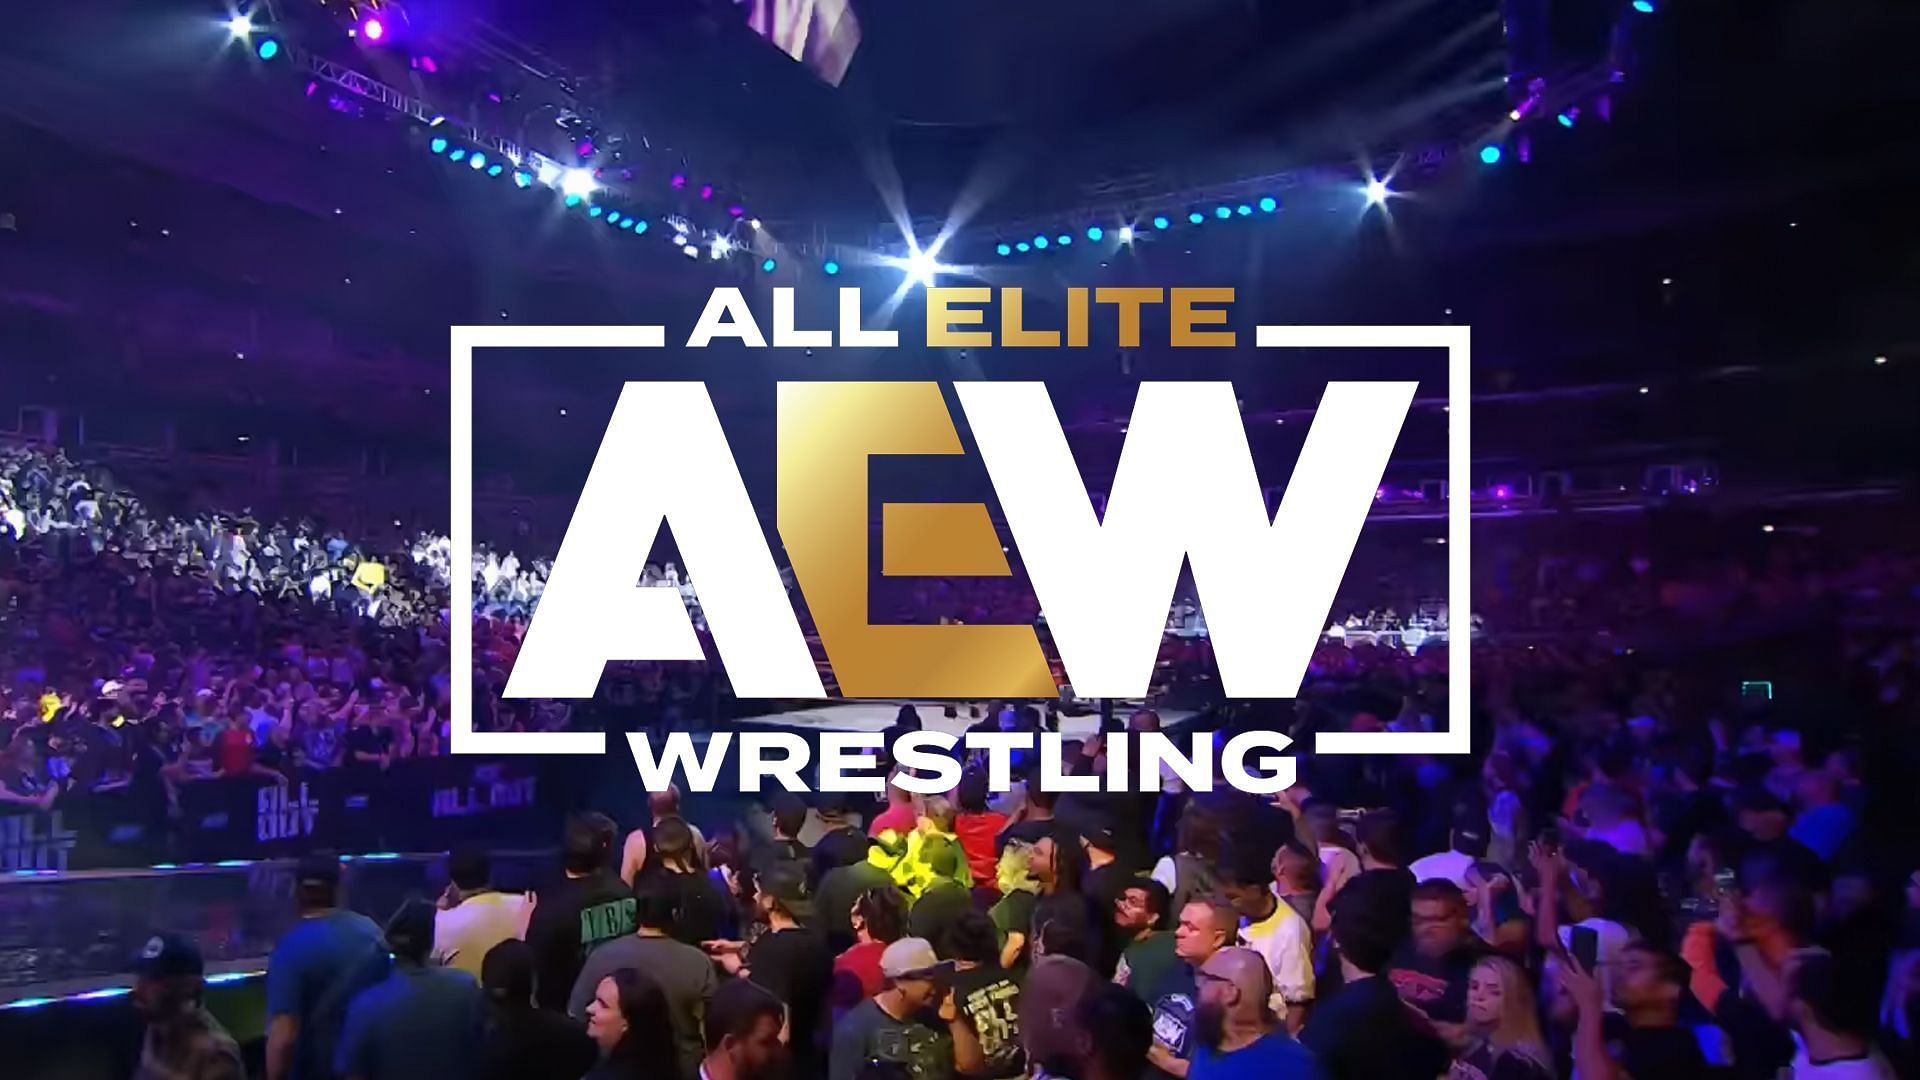 The AEW roster has undergone an overhaul in the last year